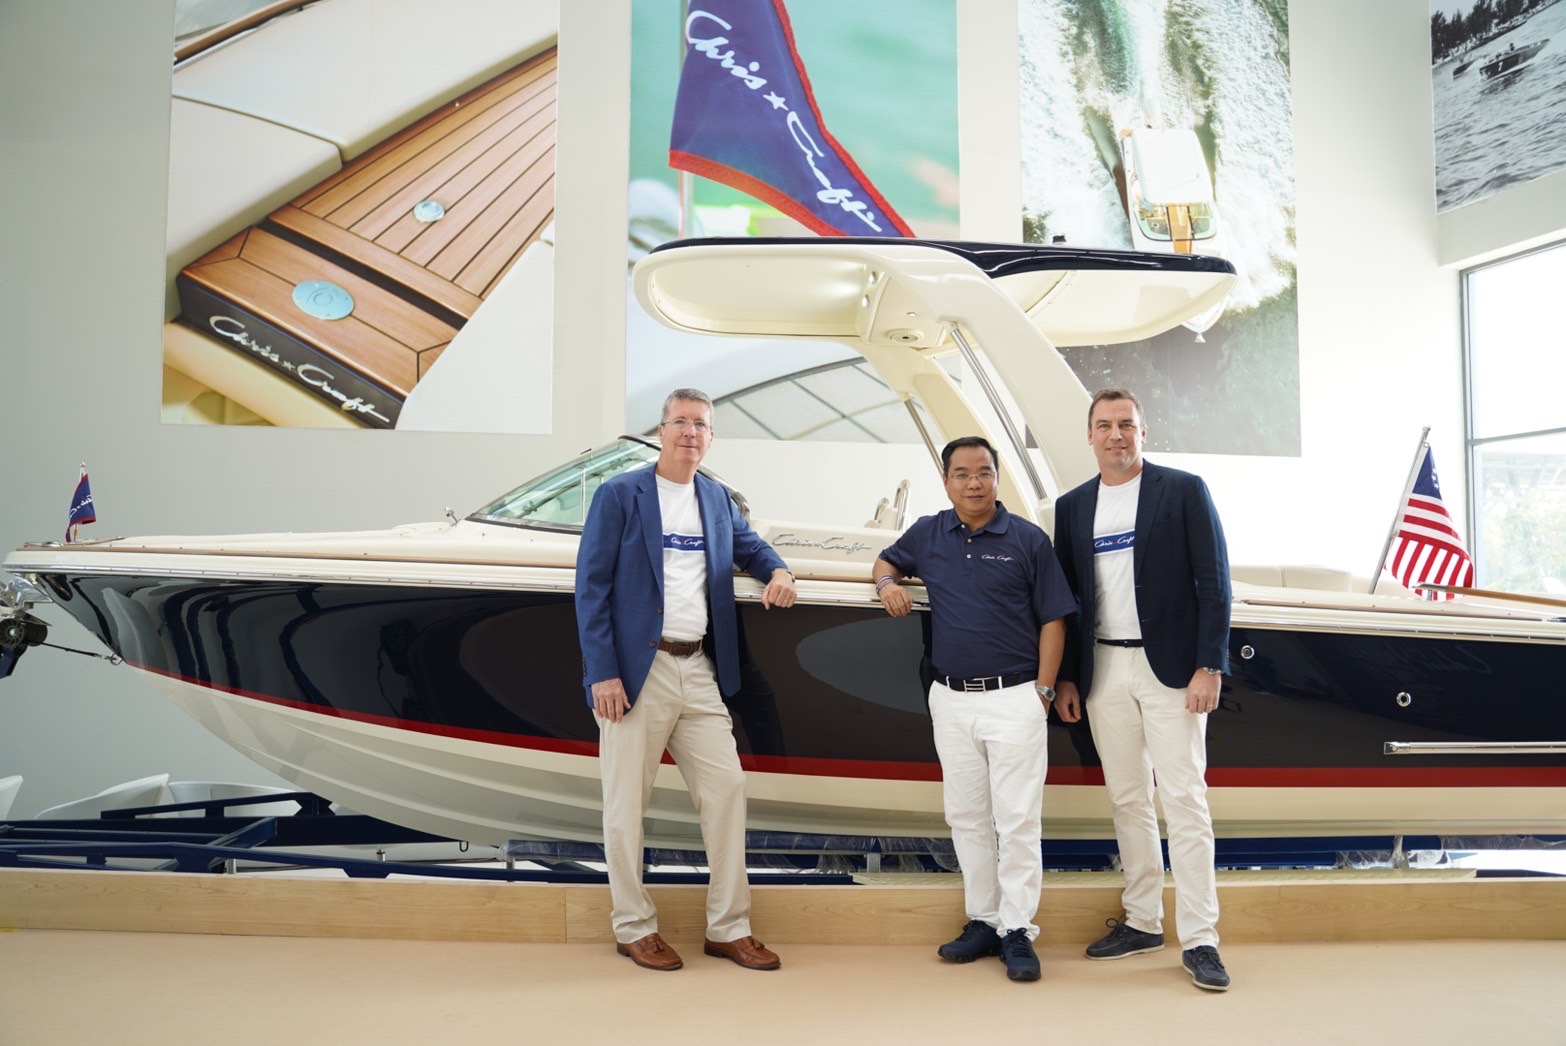 From left: Mr. Stephen F. Heese, President and CEO of Chris-Craft Corporation; Dr. Sunhavut Thamchuanviriya, Group Chief Executive Officer, Millennium Group Corporation (ASIA) PCL; and Mr. Bjorn Antonsson, Director of Marine International Business, Millennium Group Corporation (ASIA) PCL.